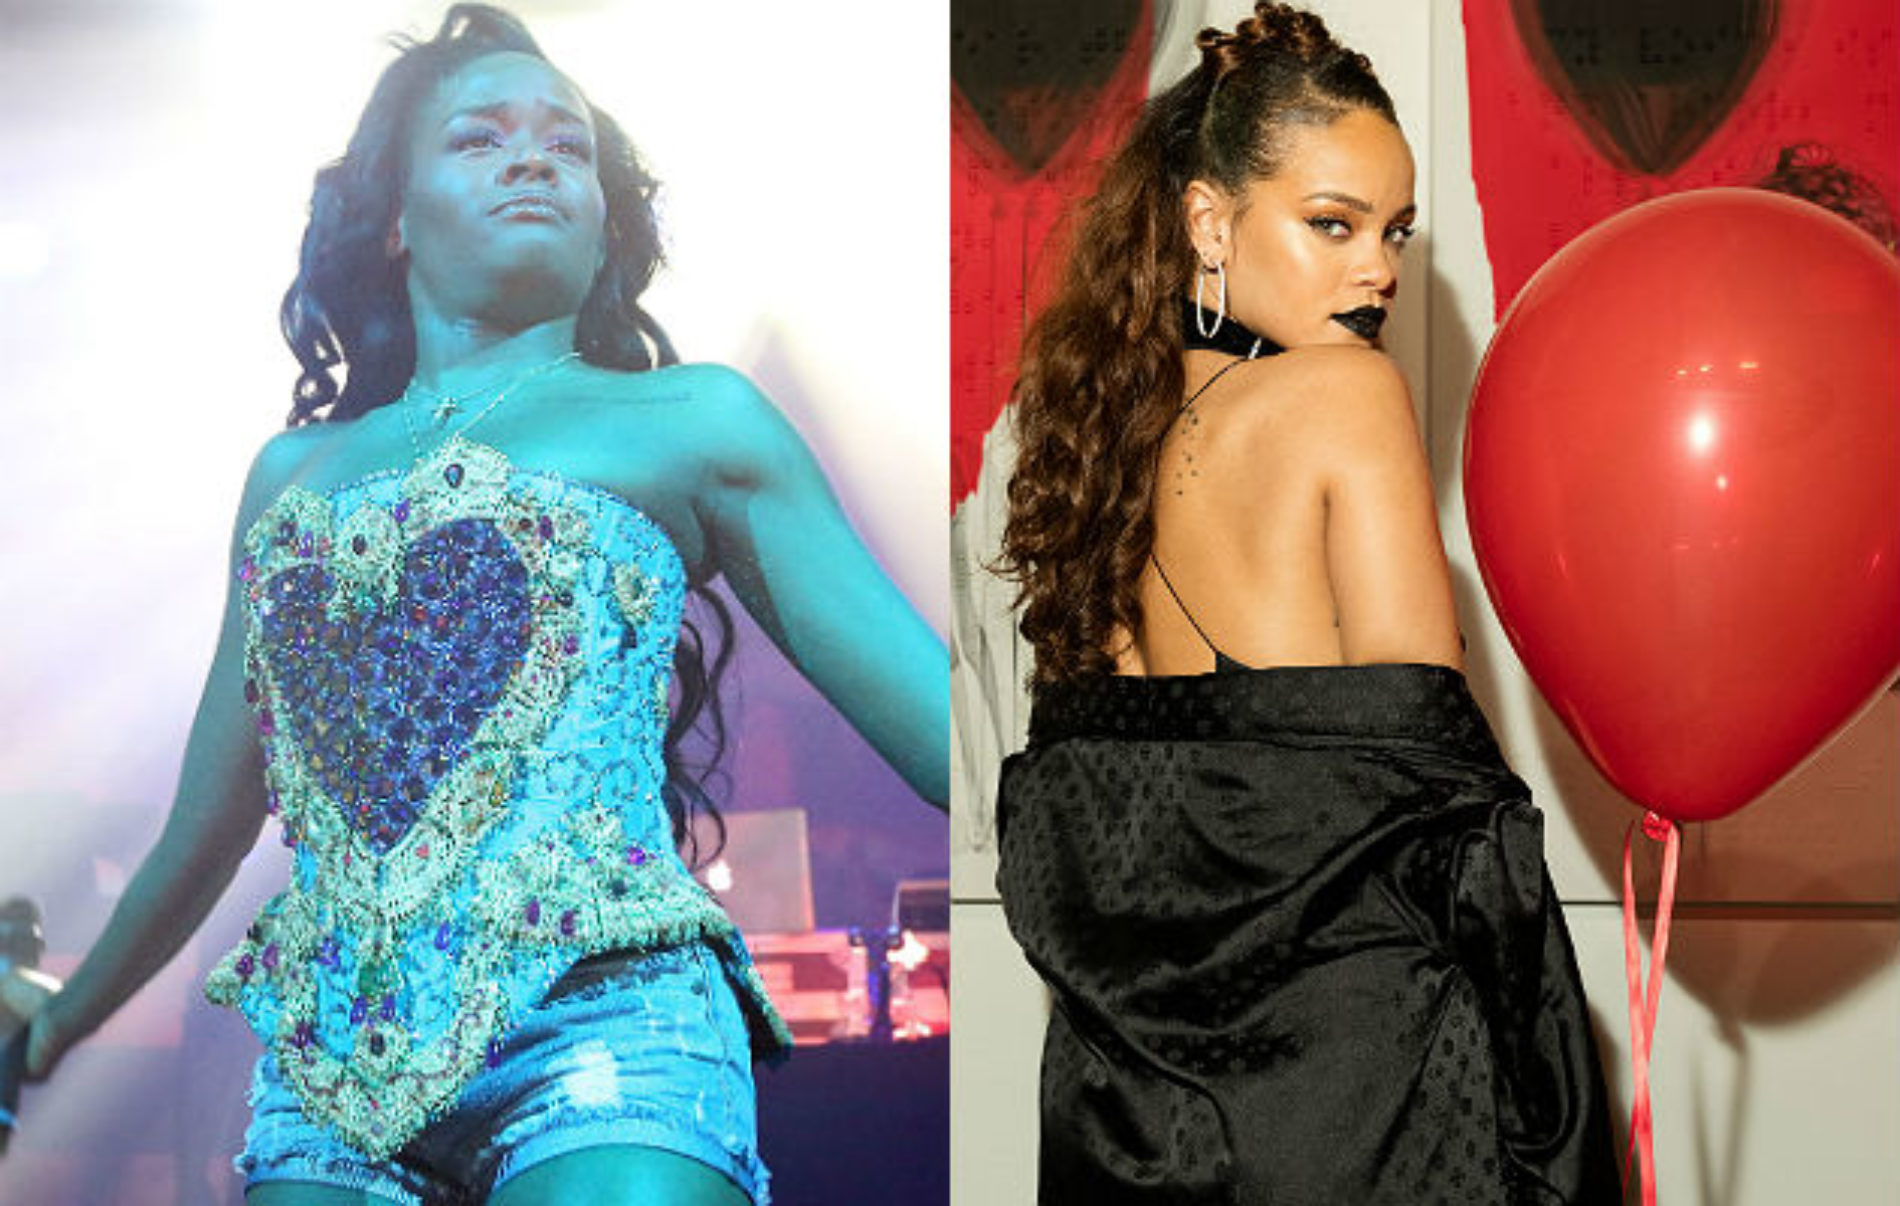 Azealia Banks lashes out at Rihanna in latest feud, posts her number online